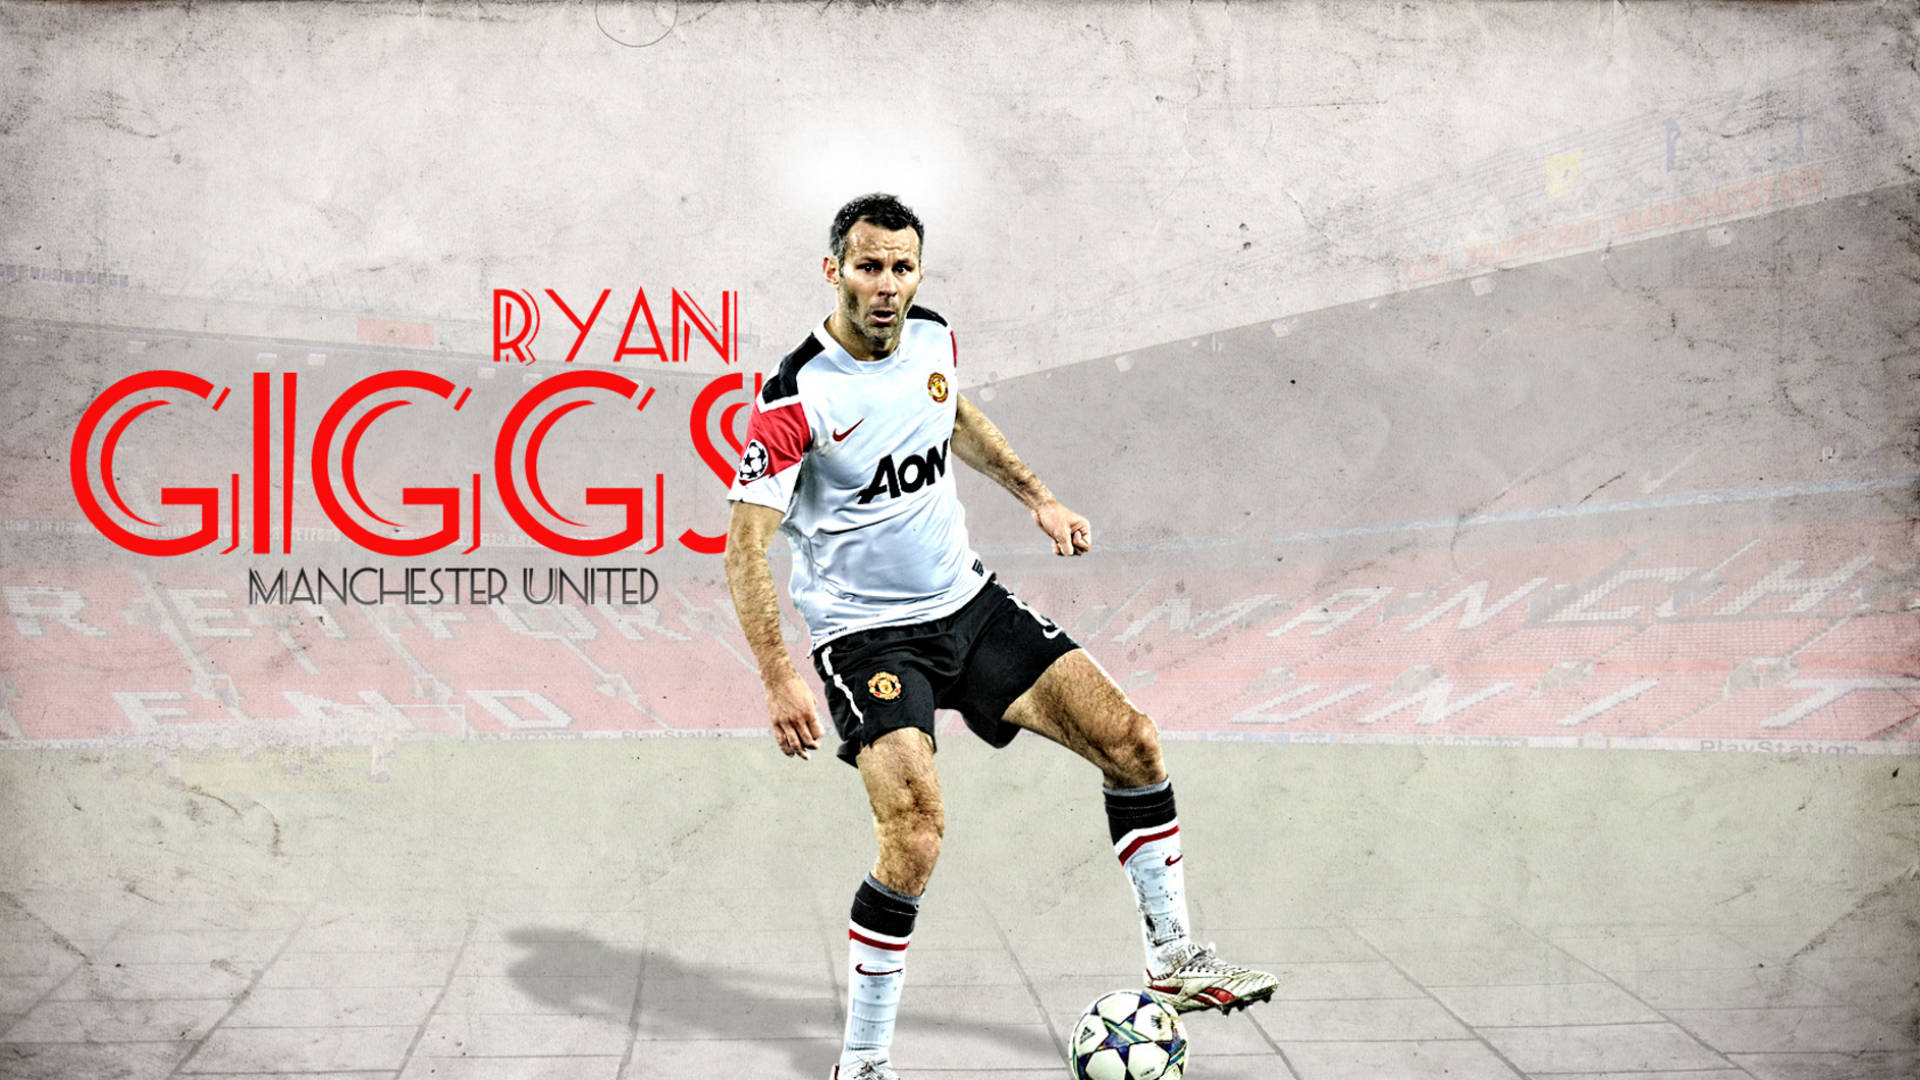 Ryan Giggs Manchester Vs. Liverpool Background